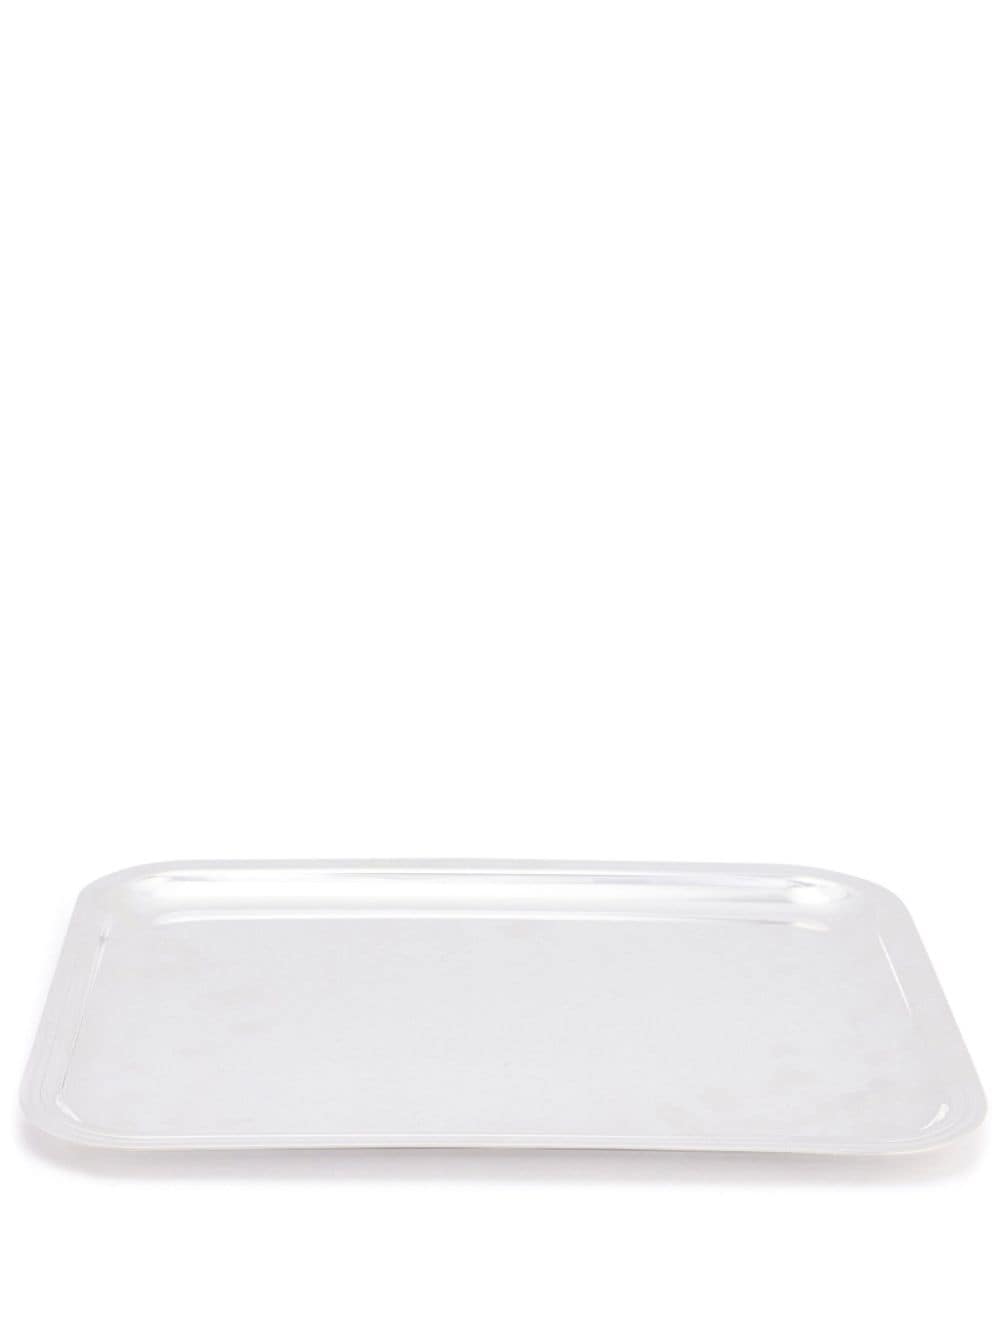 Image 1 of Christofle Albi silver-plated rectangular tray